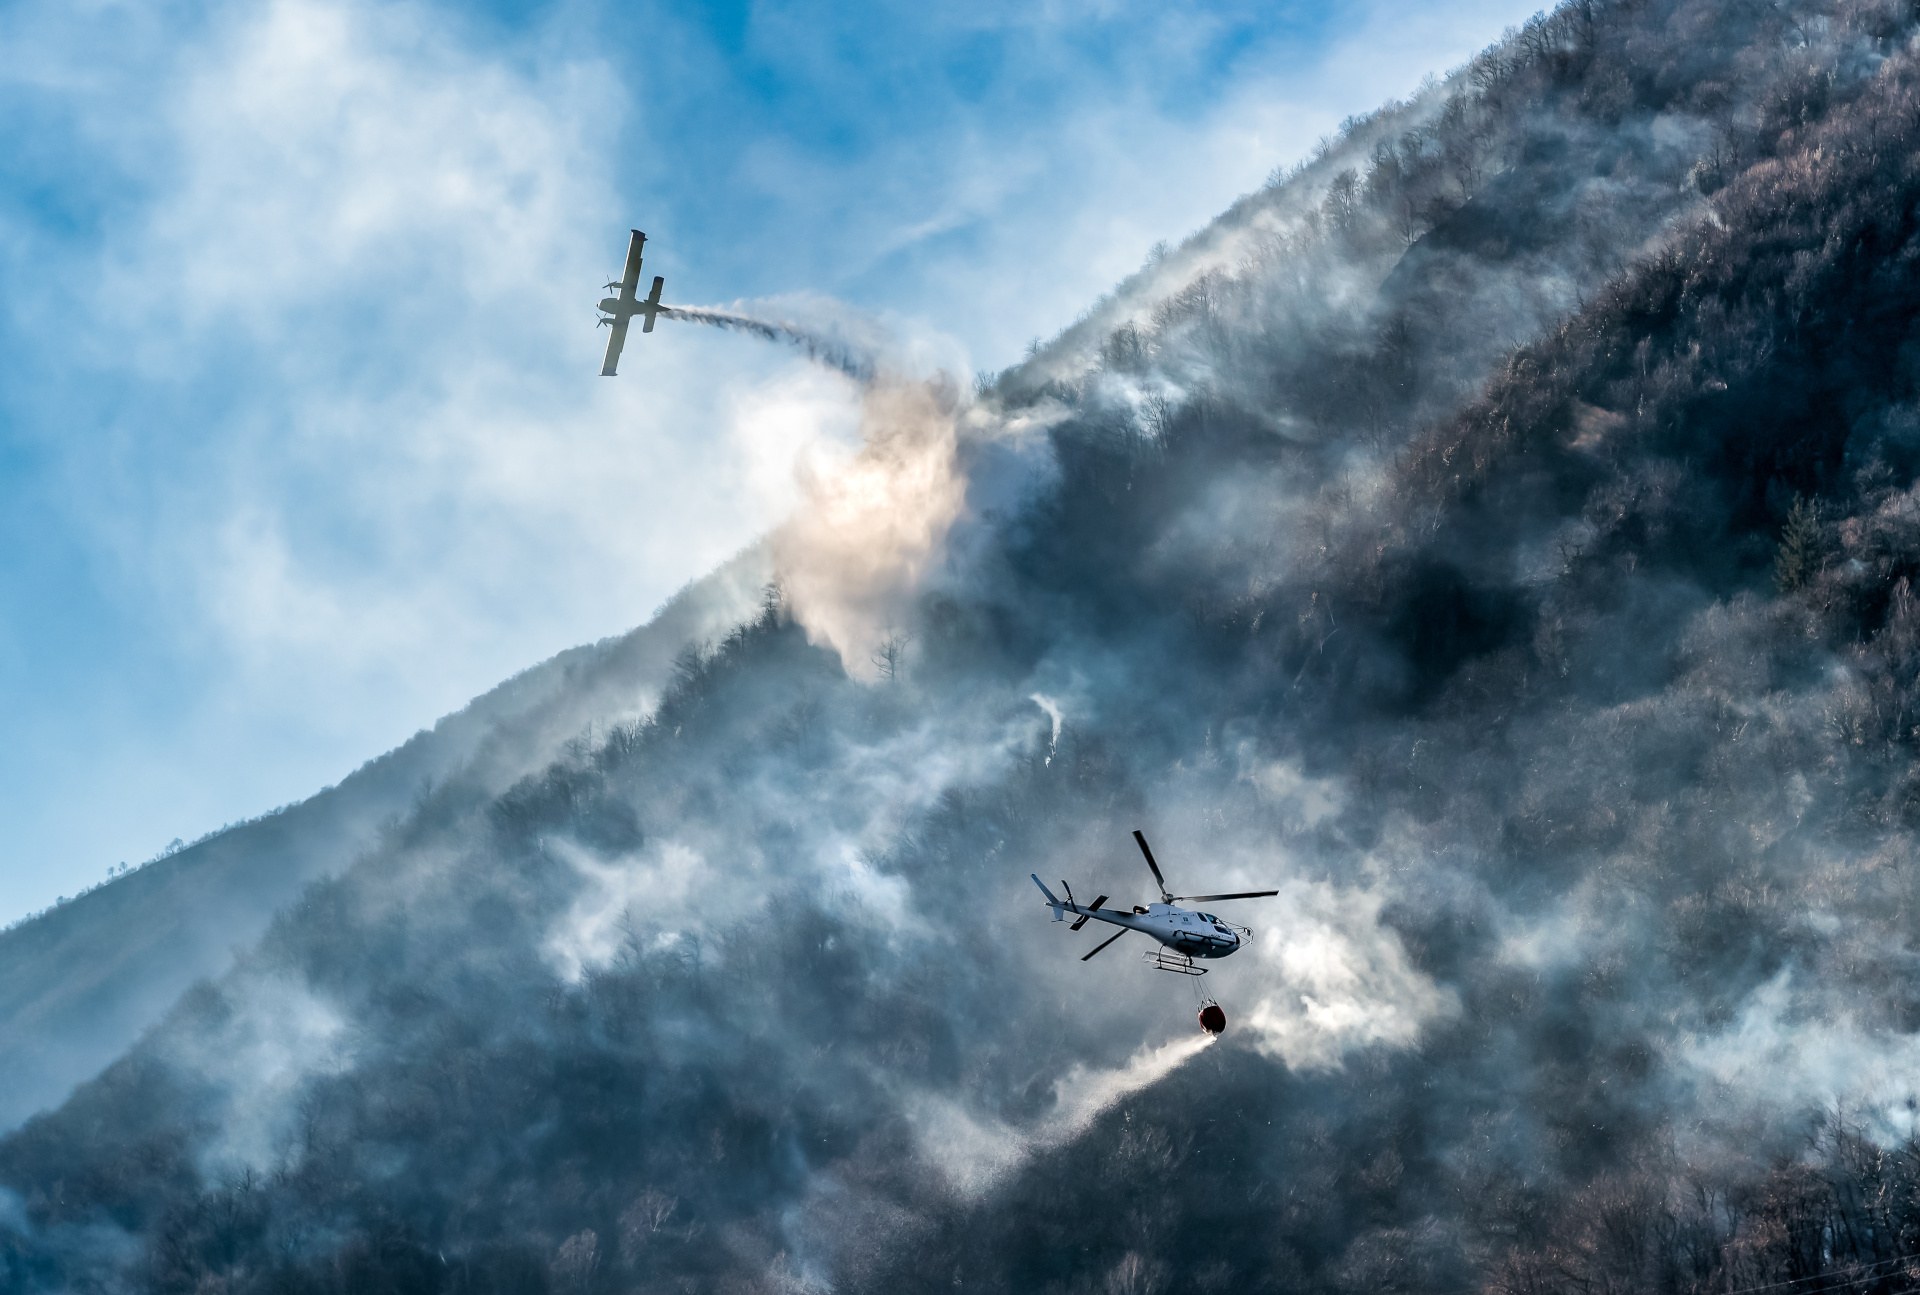 Conventional forest firefighting needs a breath of fresh air